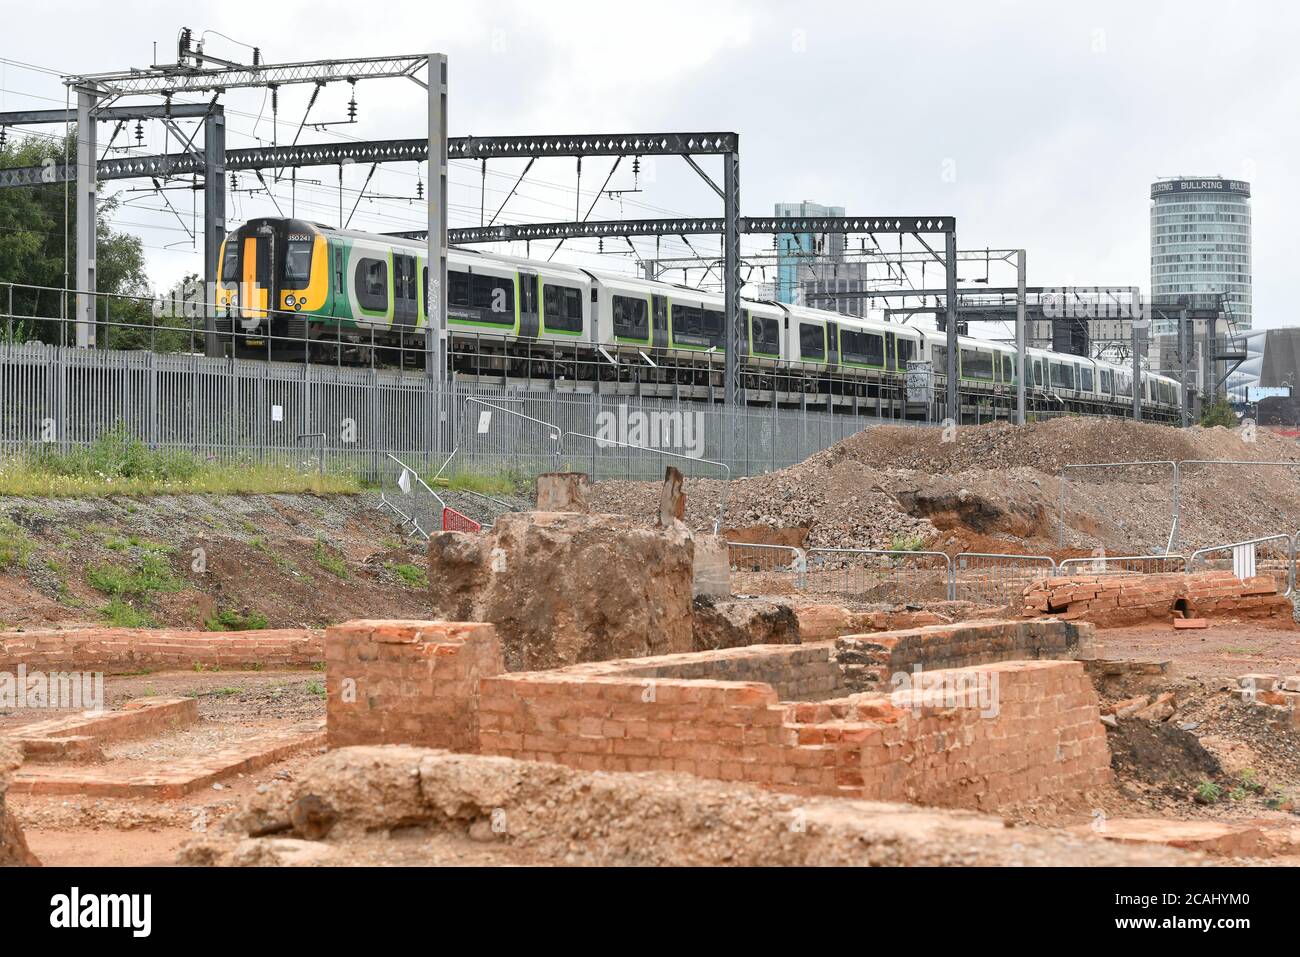 A train passes by on an embankment above the construction site for the HS2 Rail Link staion at Curzon Street in Birmingham, England, UK Stock Photo